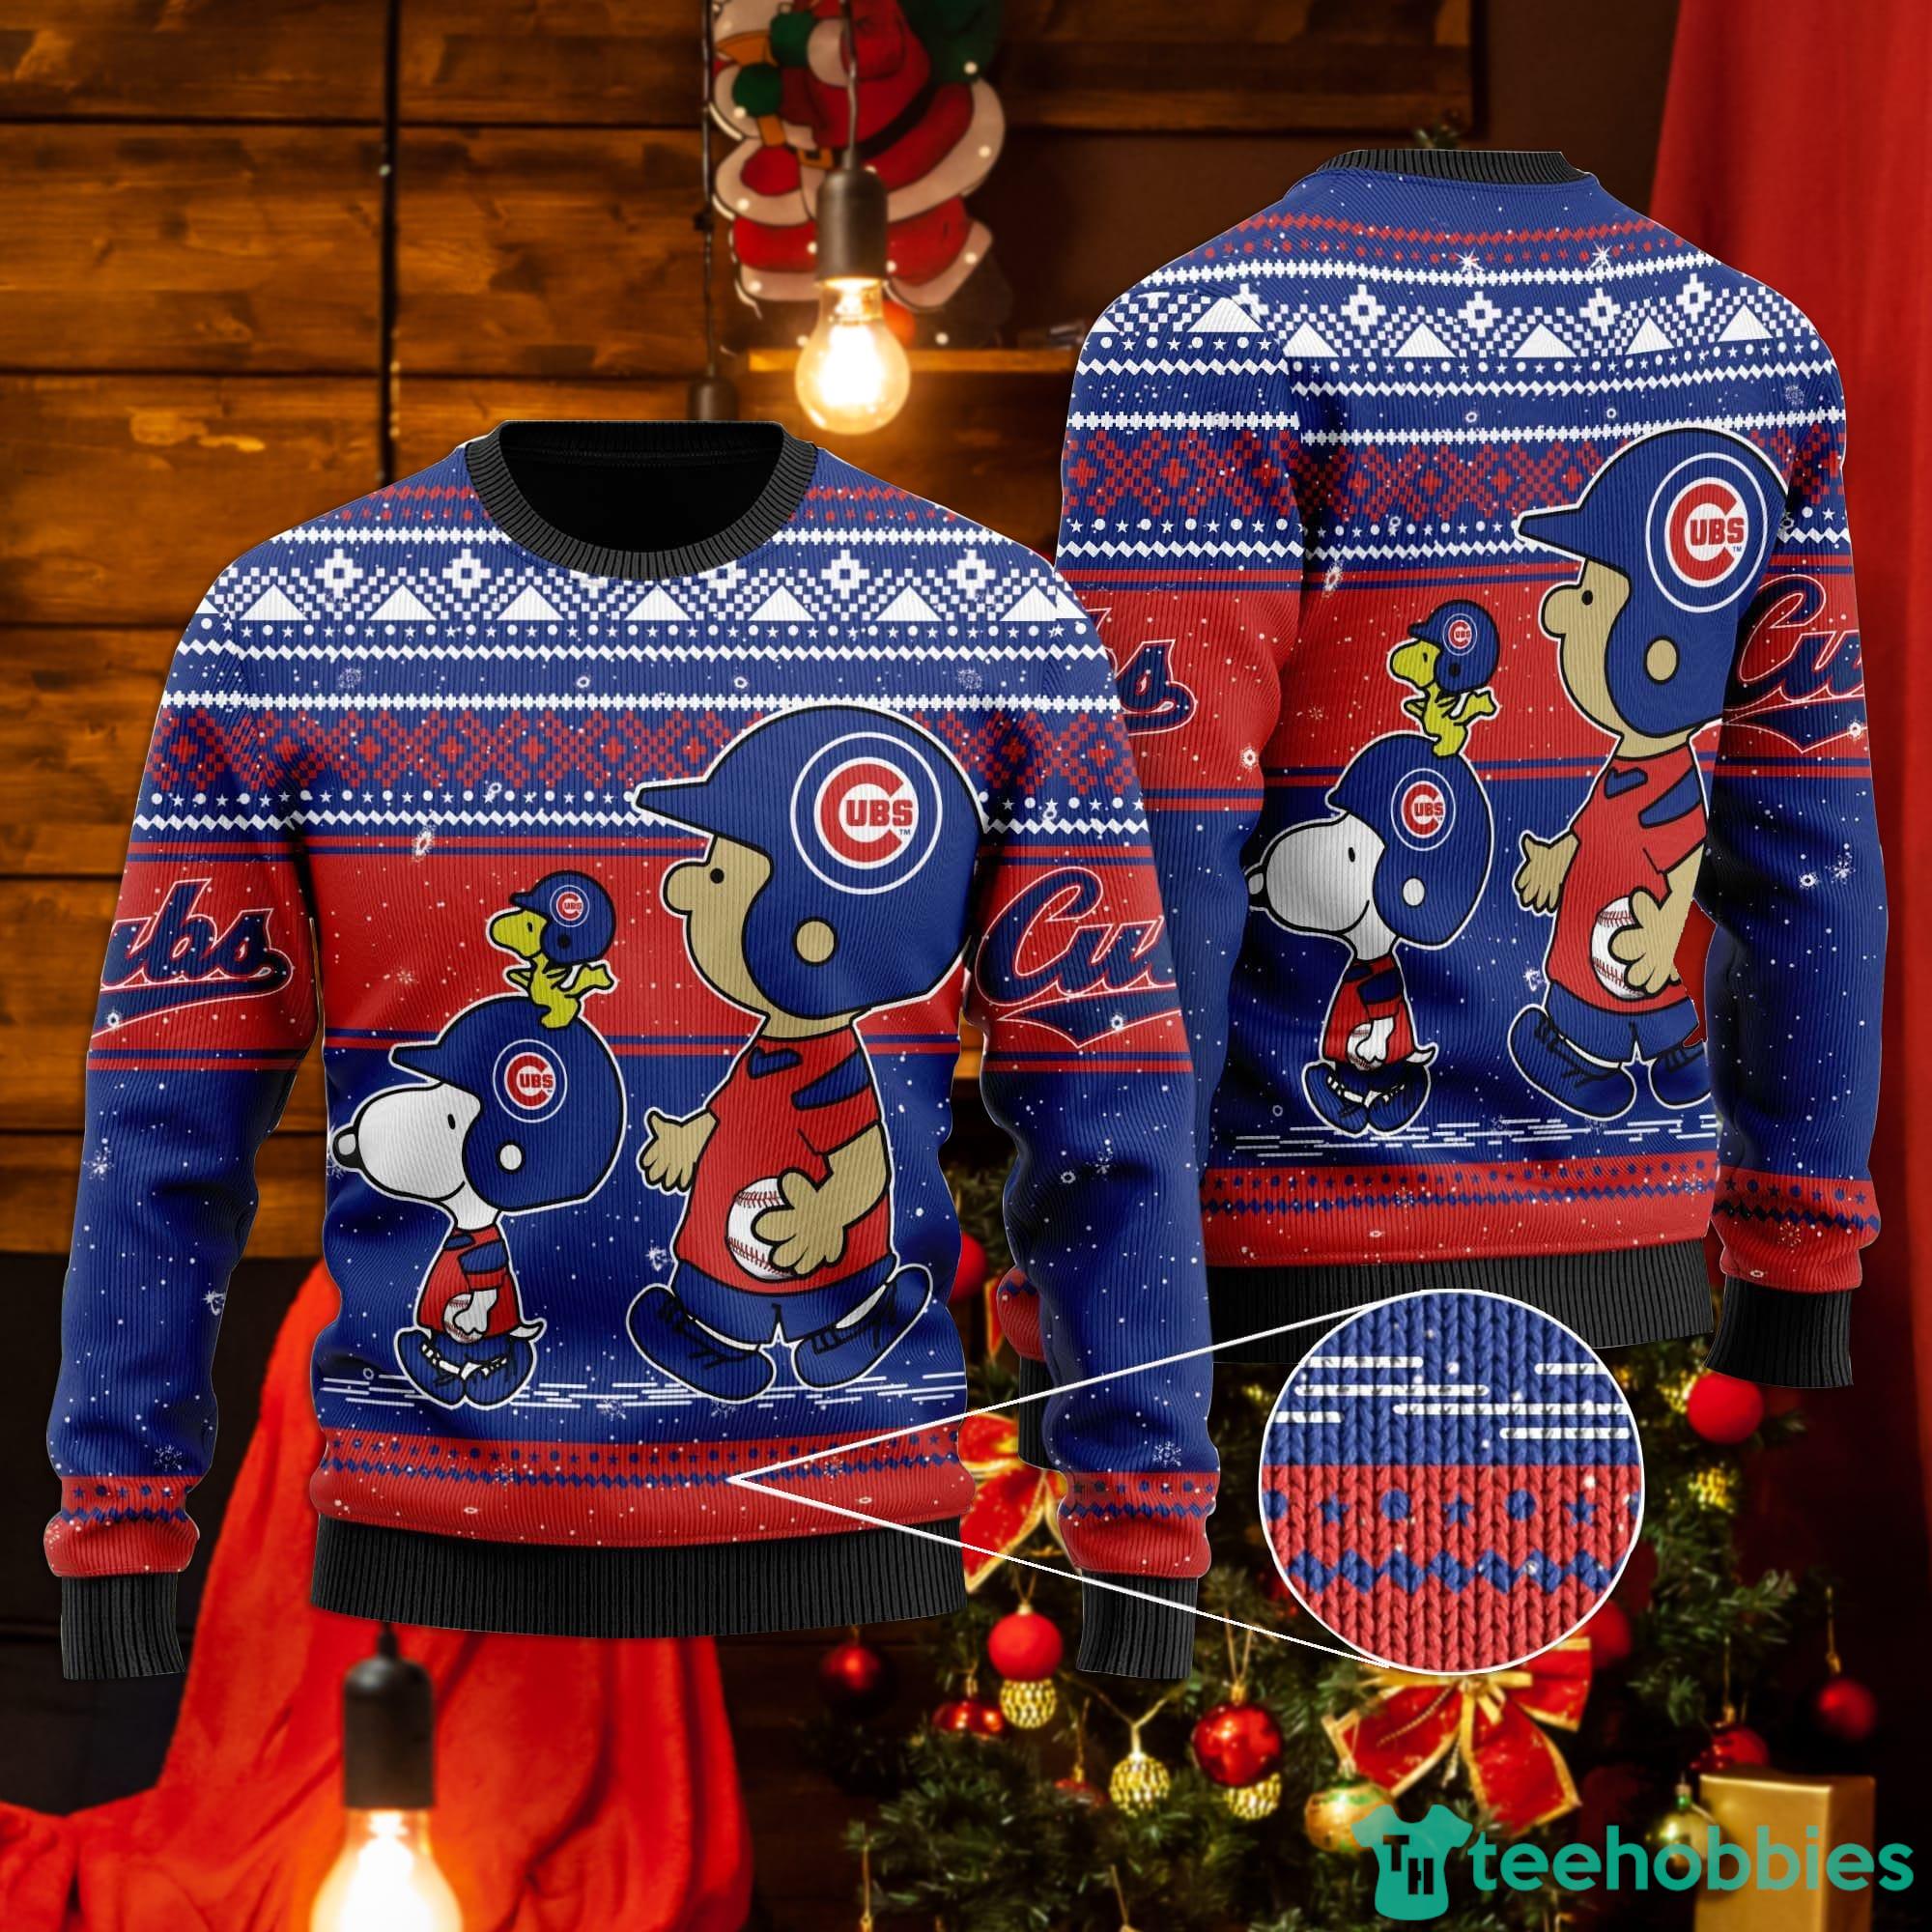 MLB Chicago Cubs Pub Dog Christmas Ugly 3D Sweater For Men And Women Gift  Ugly Christmas - Banantees